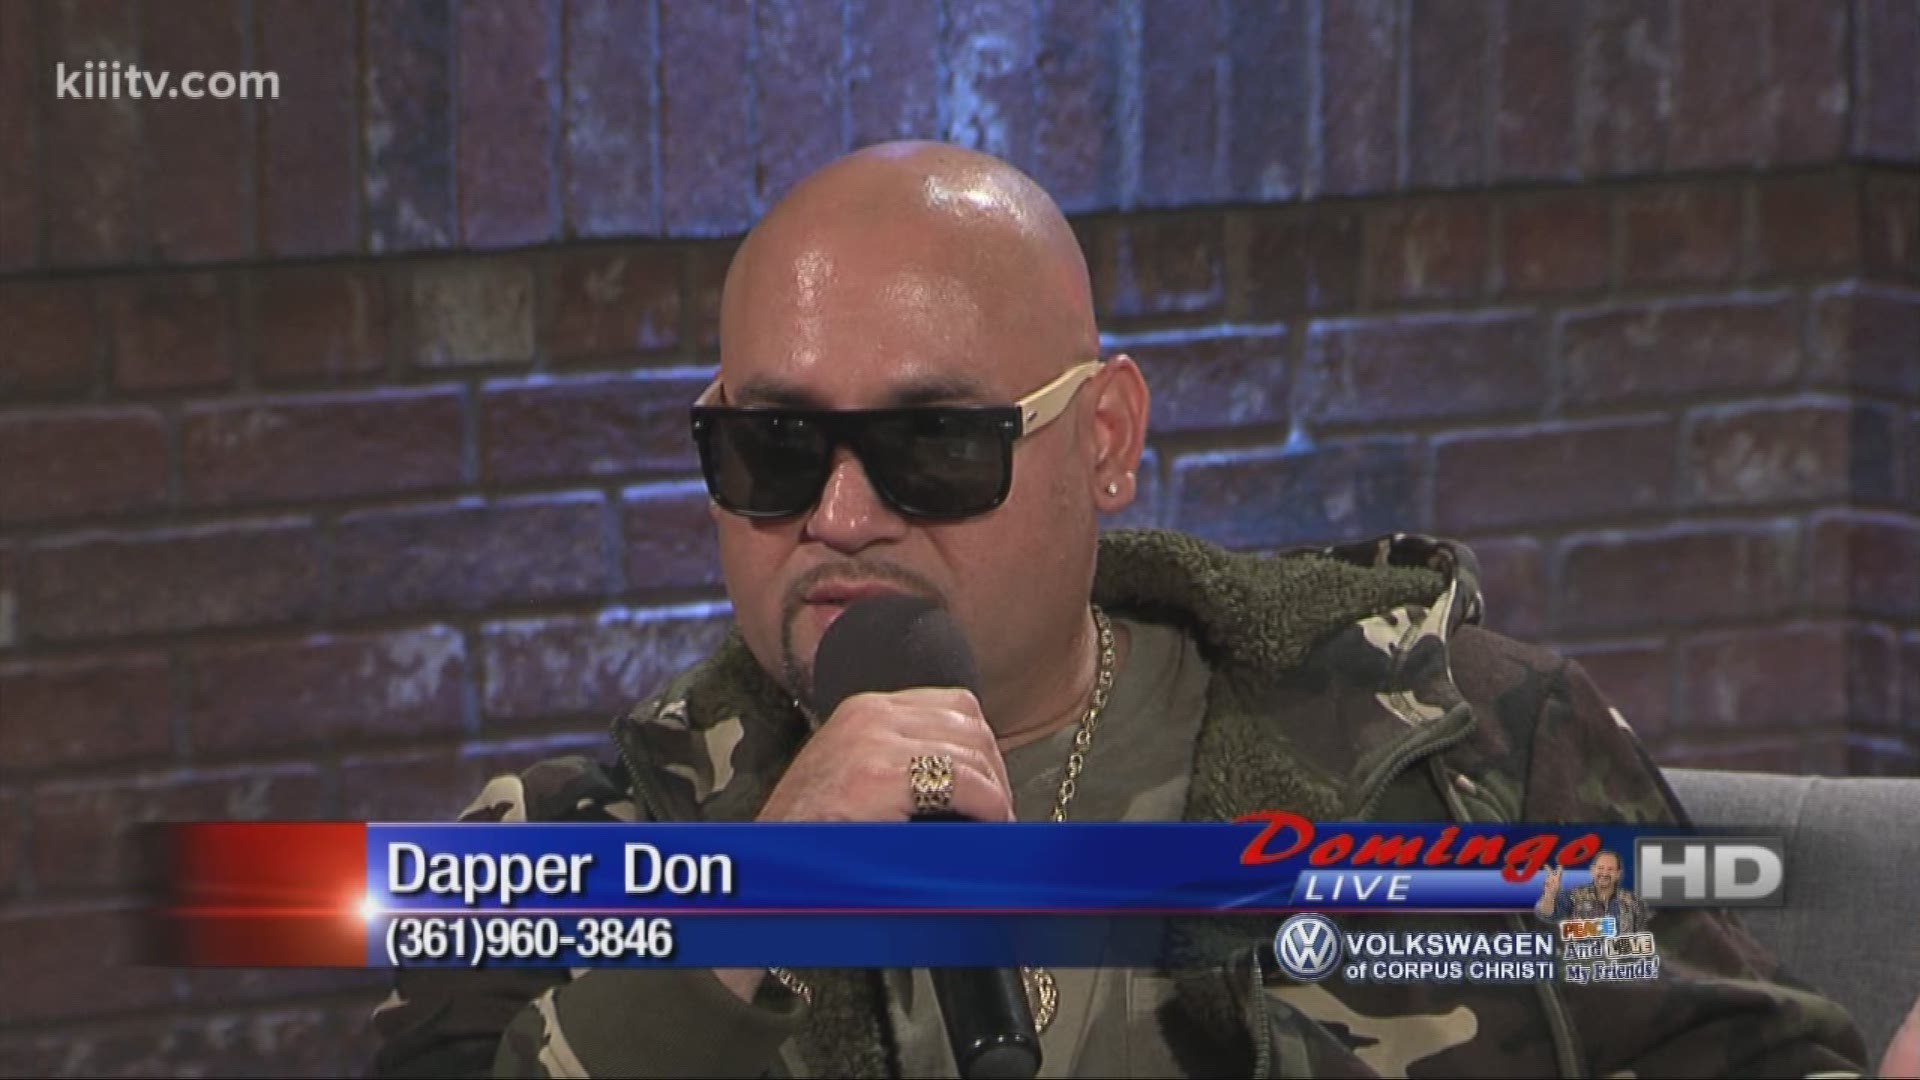 Dapper Don interviewing with Rudy Trevino on Domingo Live.